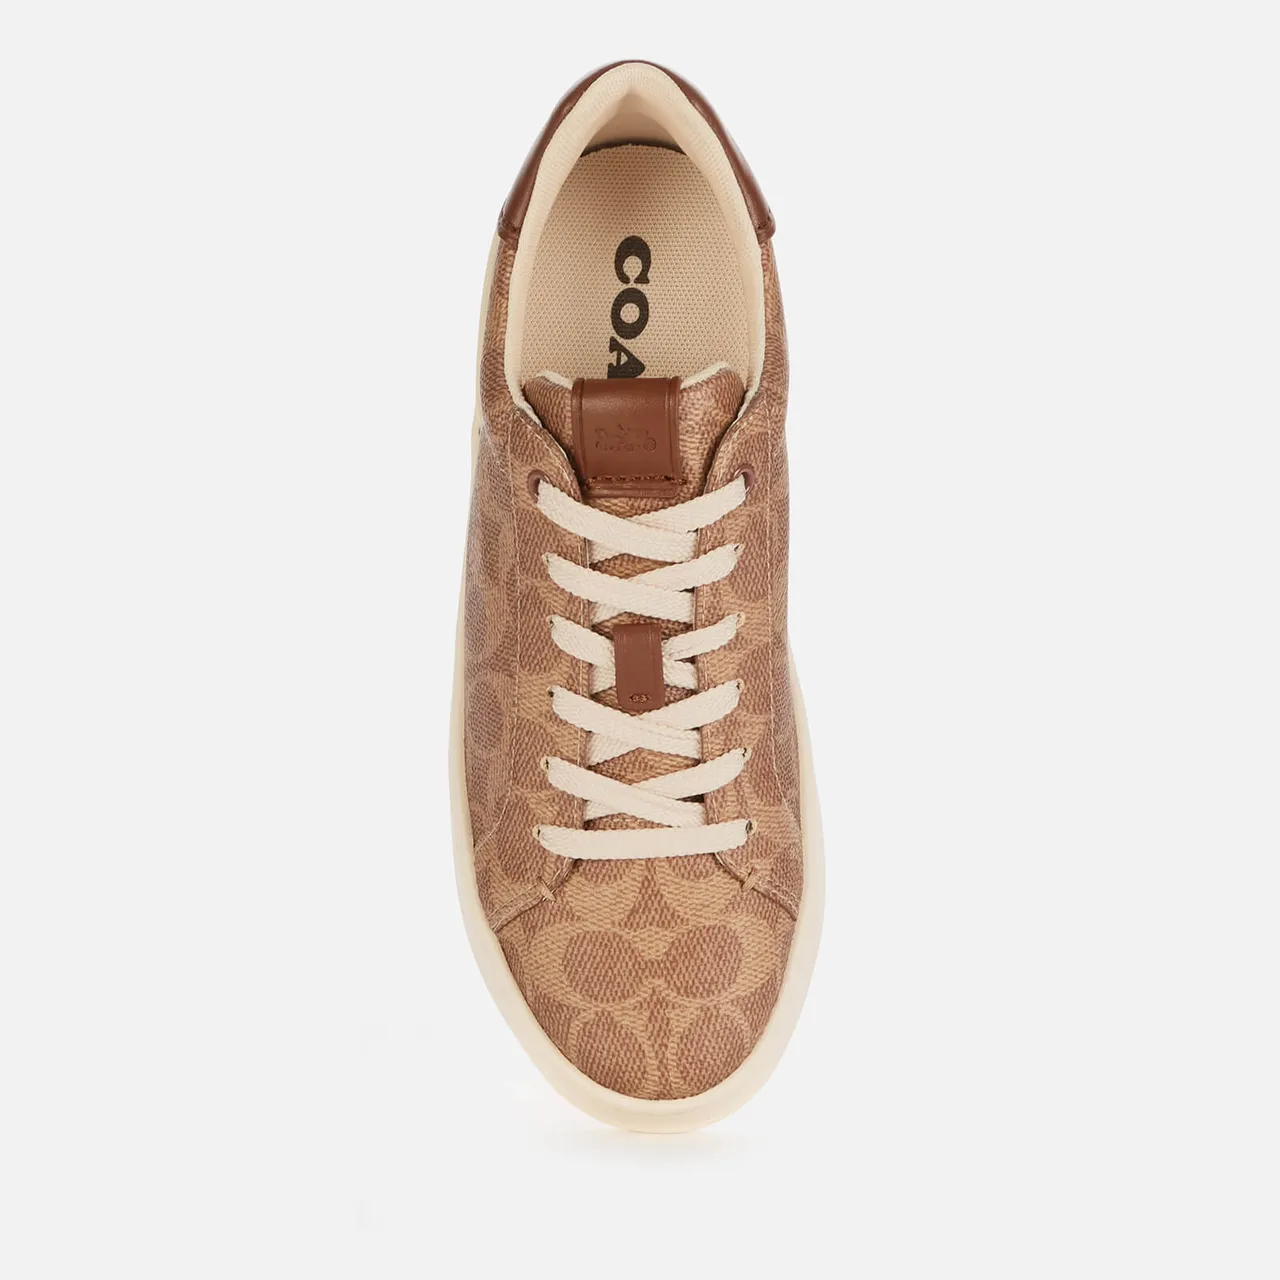 Coach Women's Lowline Coated Canvas Trainers - Tan